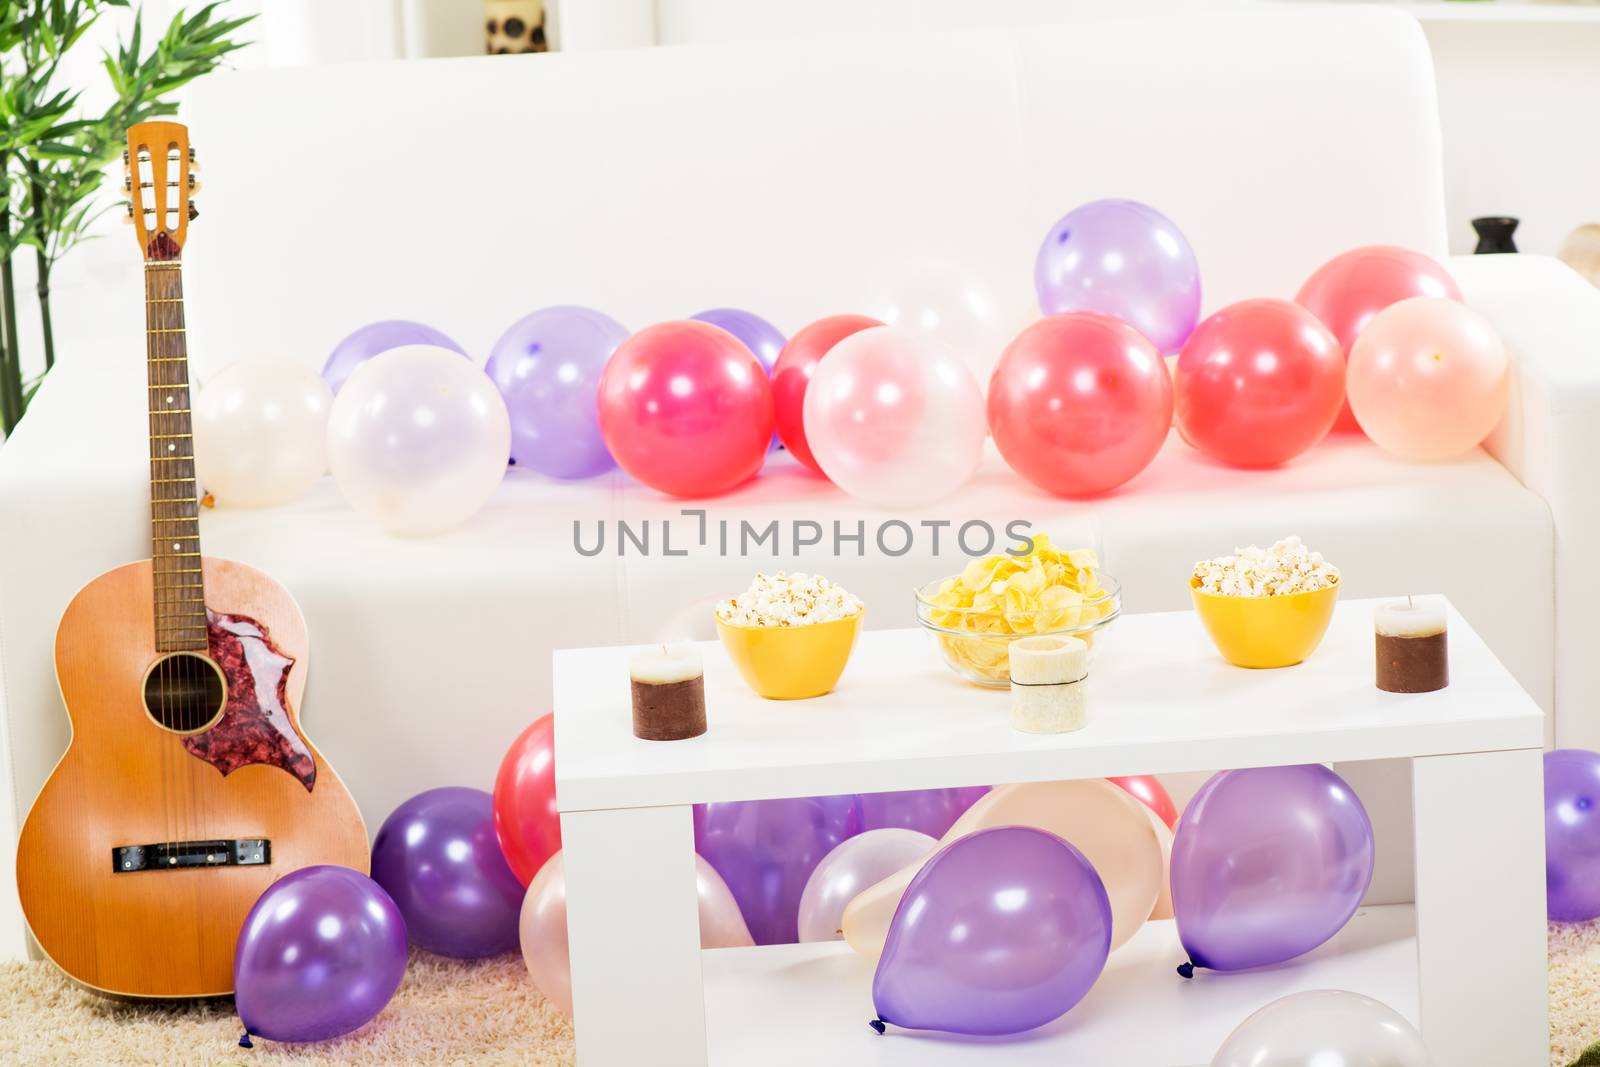 Room with a couch where is leaned acoustic guitar, couch and floor are covered with balloons, and on the table in front of the couch, there are decorative candles and snacks.